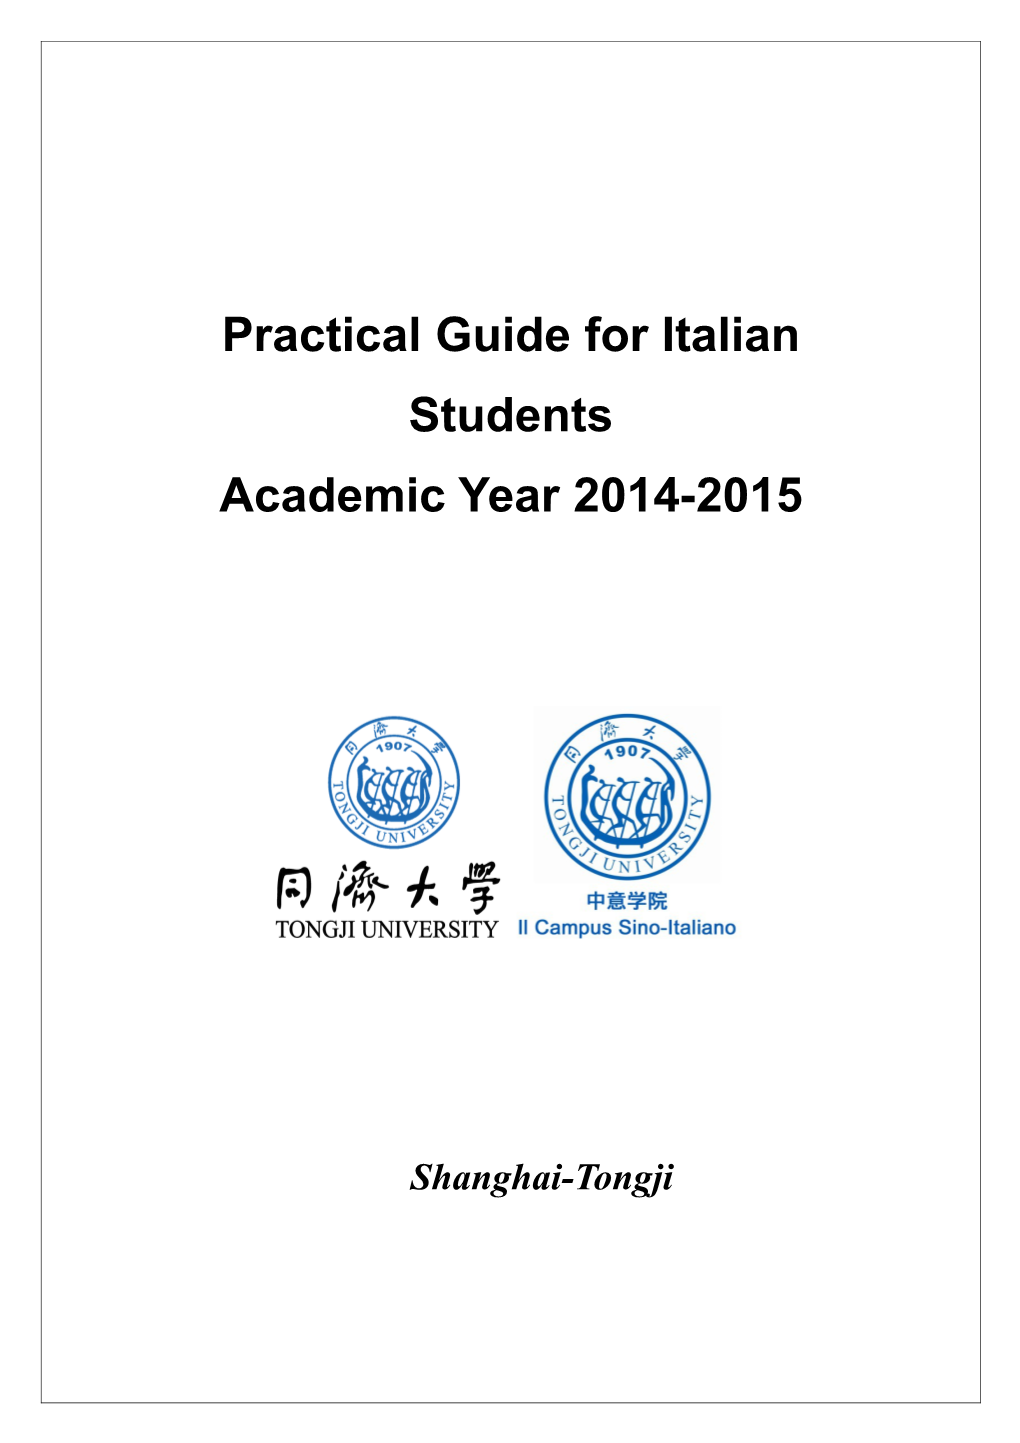 Practical Guide for Italian Students